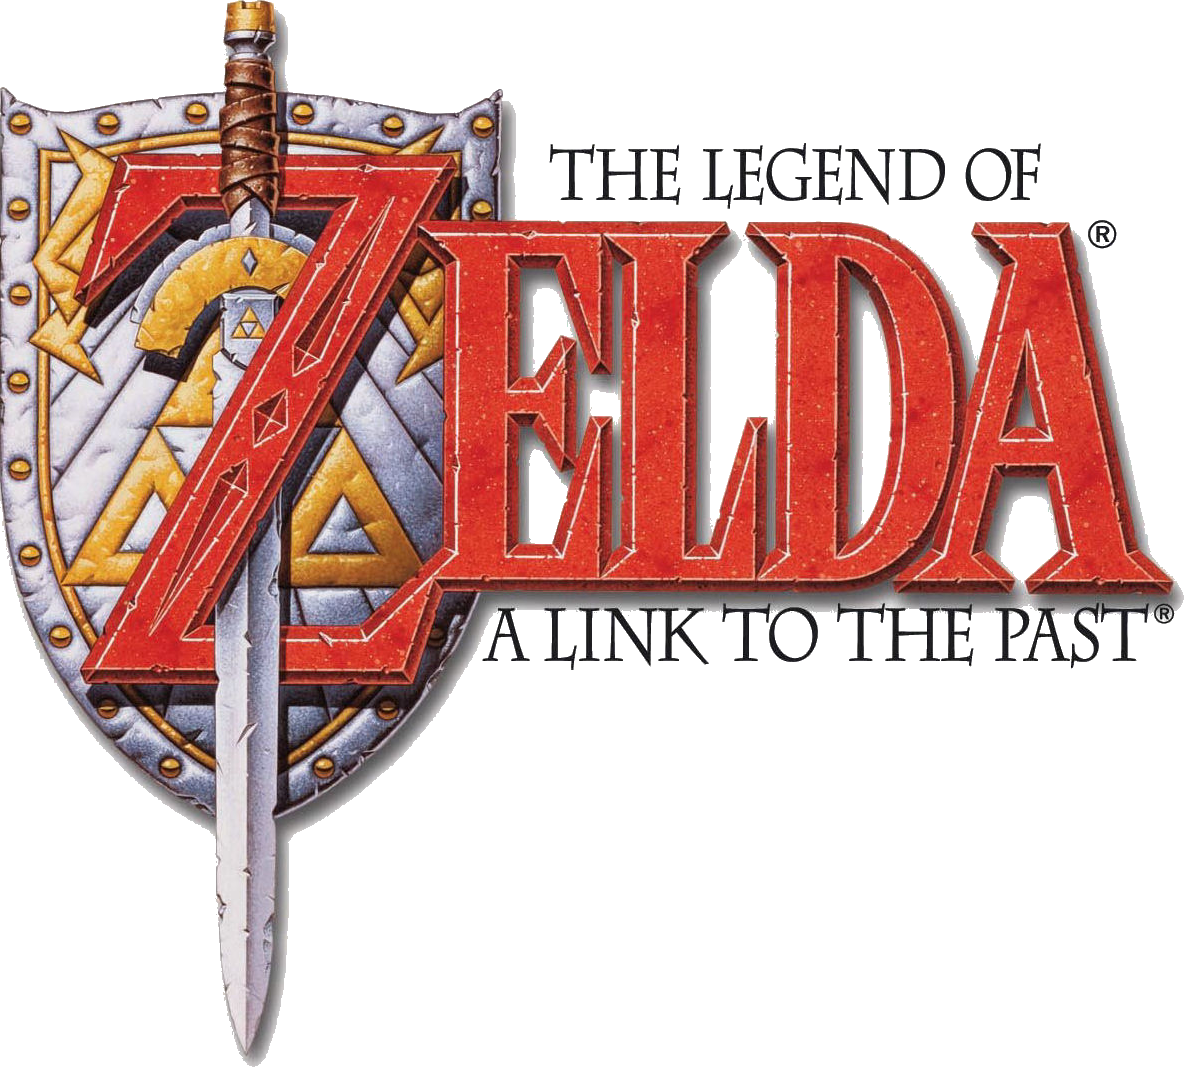 The_Legend_of_Zelda_-_A_Link_to_the_Past_logo.png